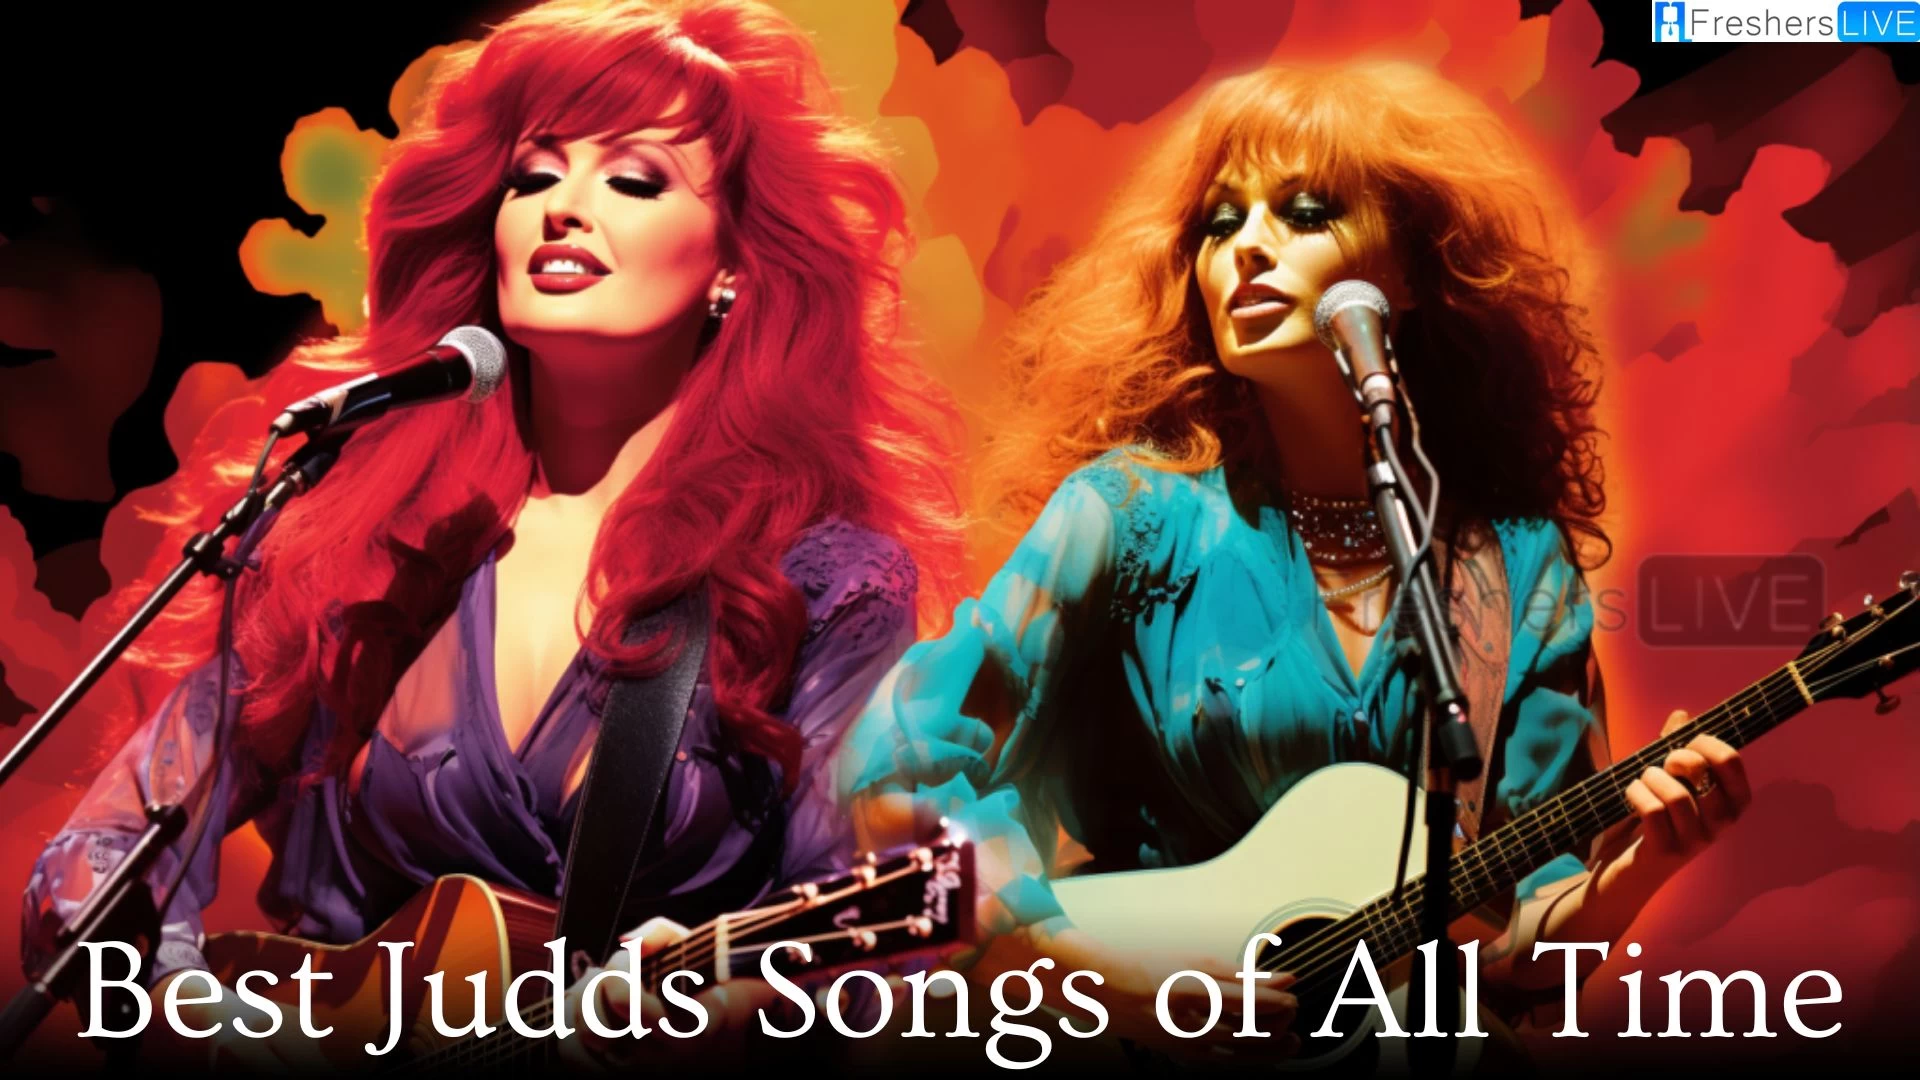 Best Judds Songs of All Time - Honoring Top 10 Country Music Legends